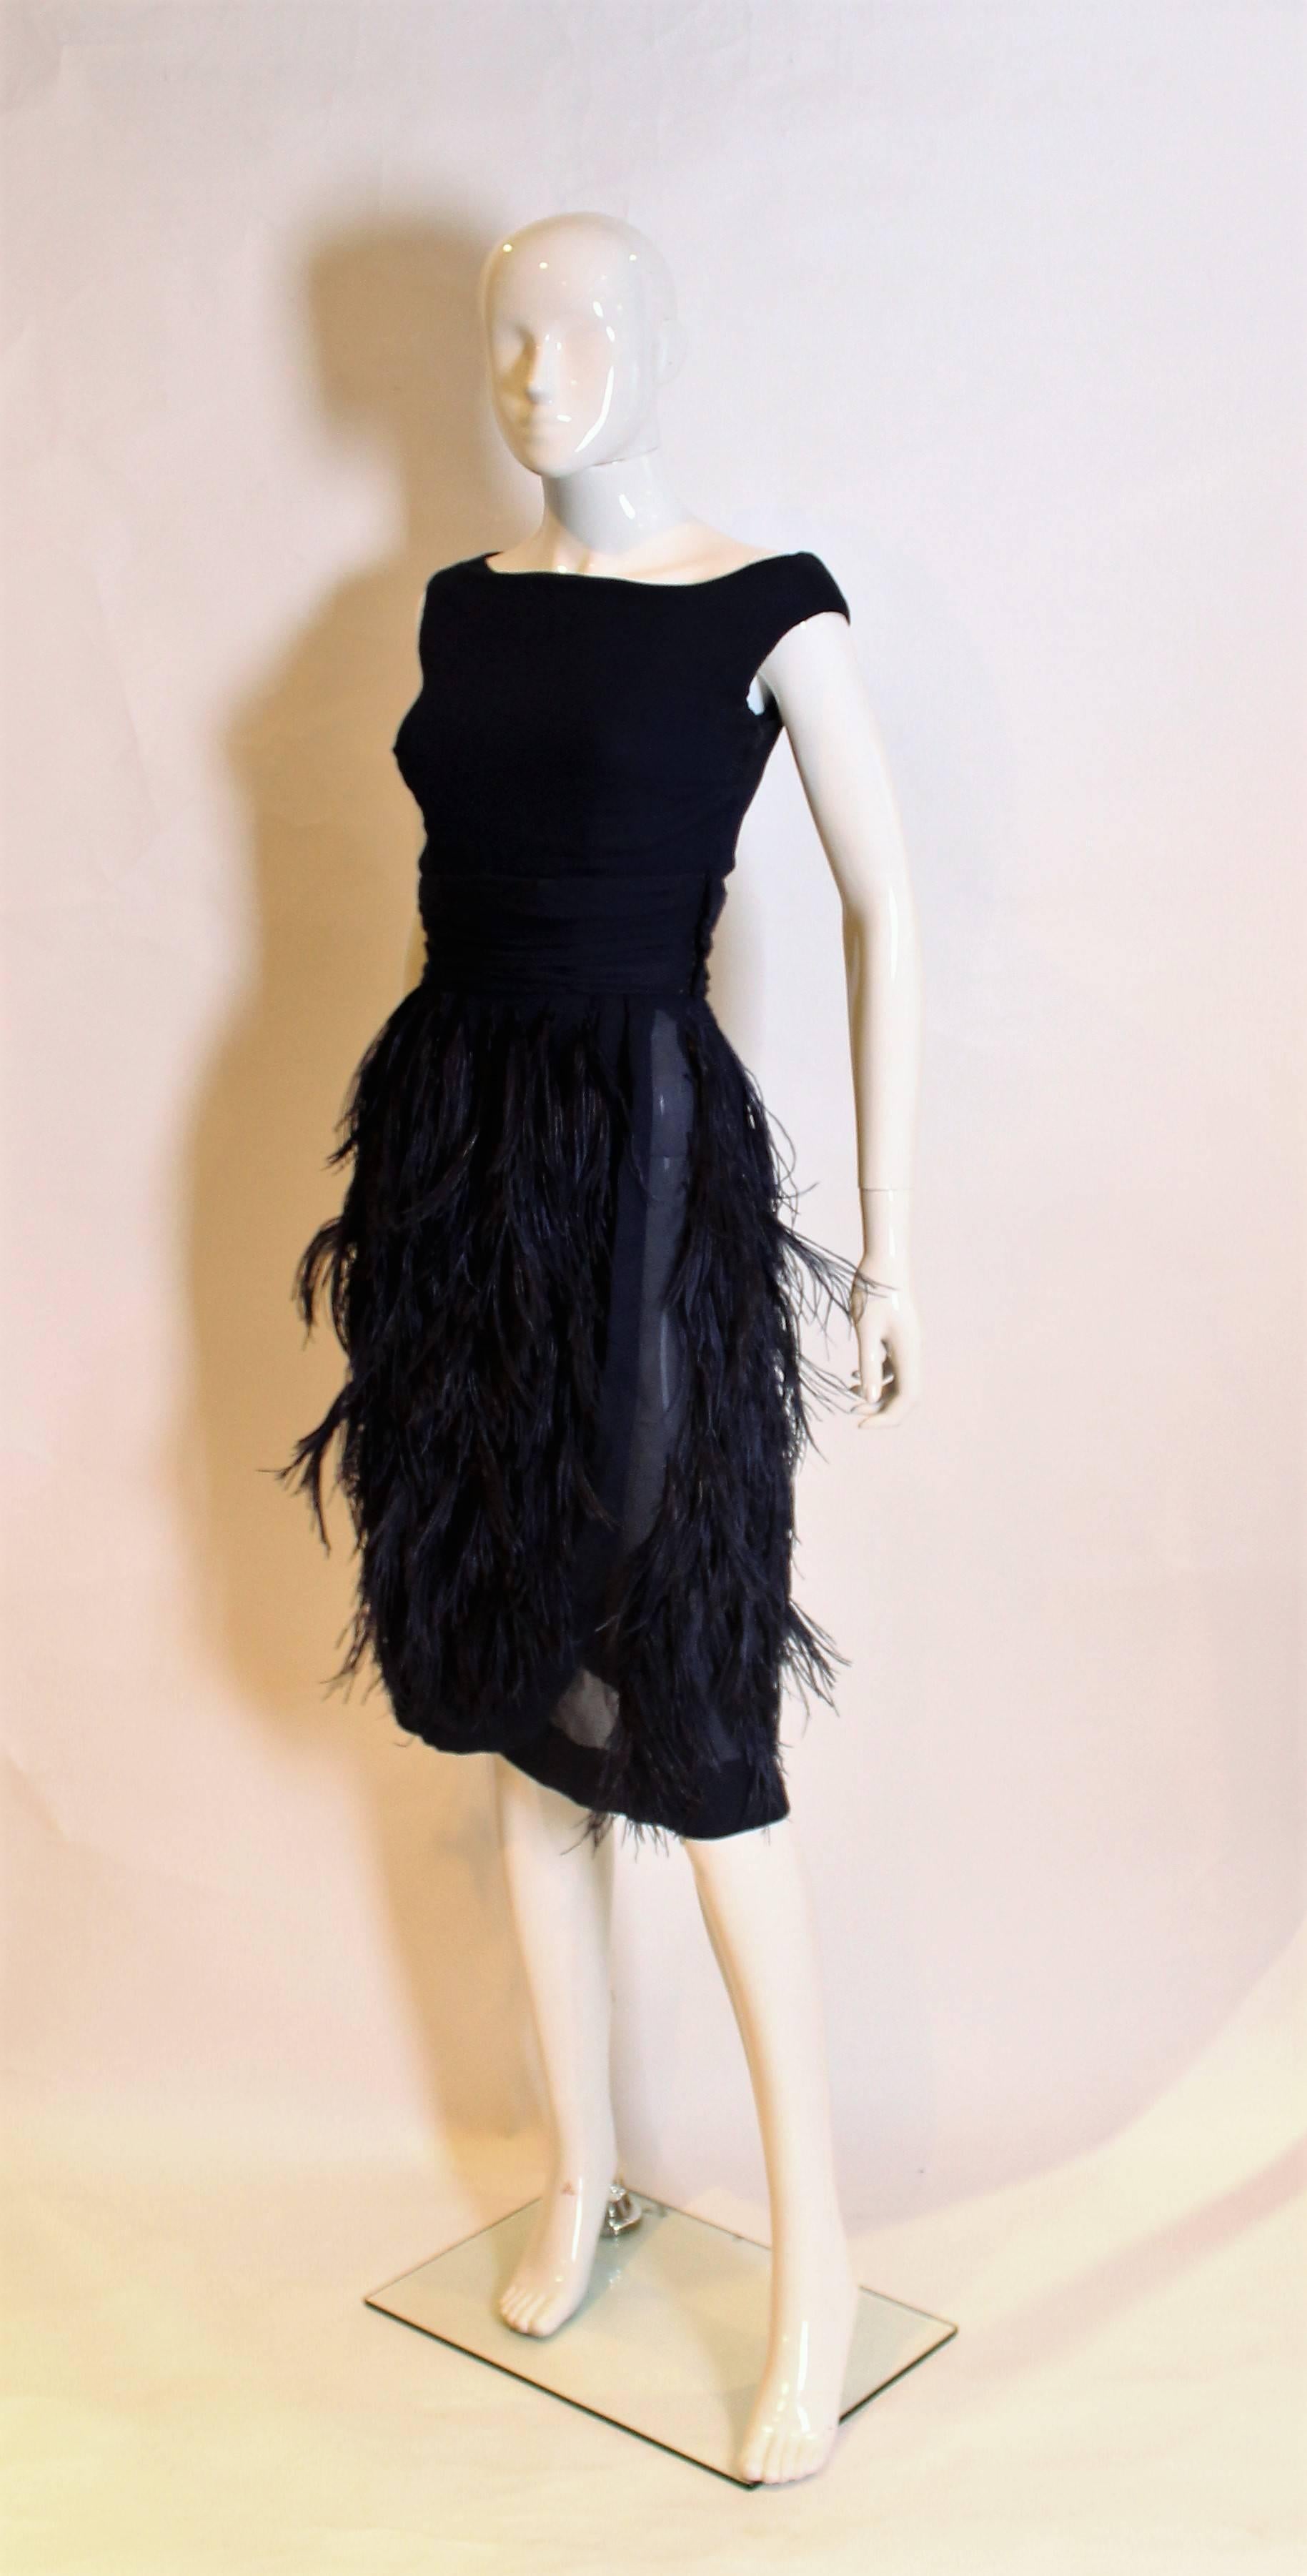 A charming and chic cocktail dress by British designer Norman Hartnell.
In a bue silk chiffon , the dress dress is sleaveless with a slip over top, and self fabric belt.There is a side zip and the skirt is covered in blue feathers.